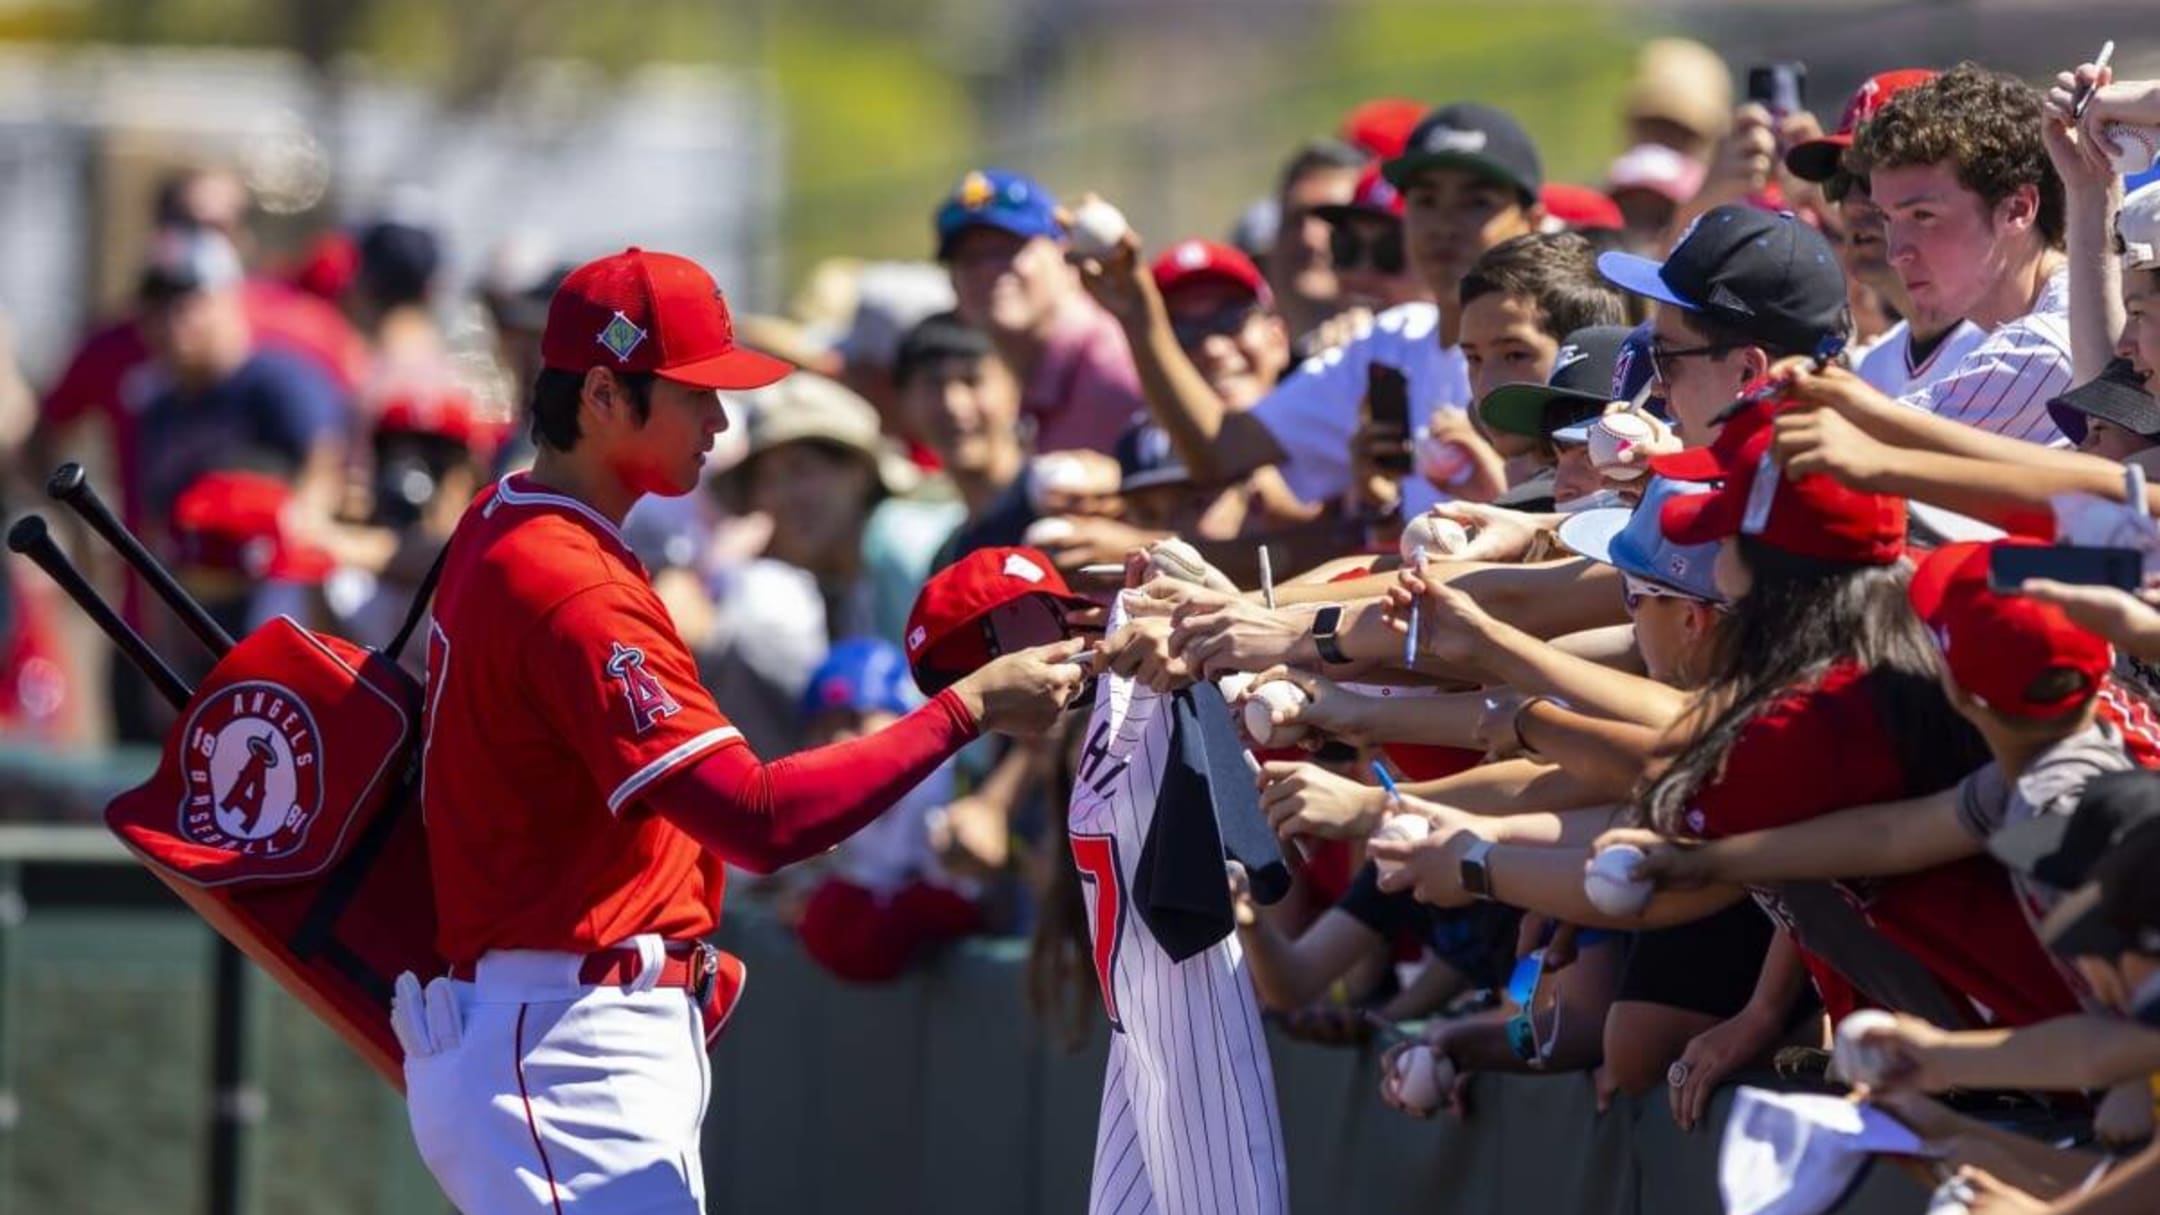 Shohei Ohtani Among Highest Selling Jerseys in MLB This Year